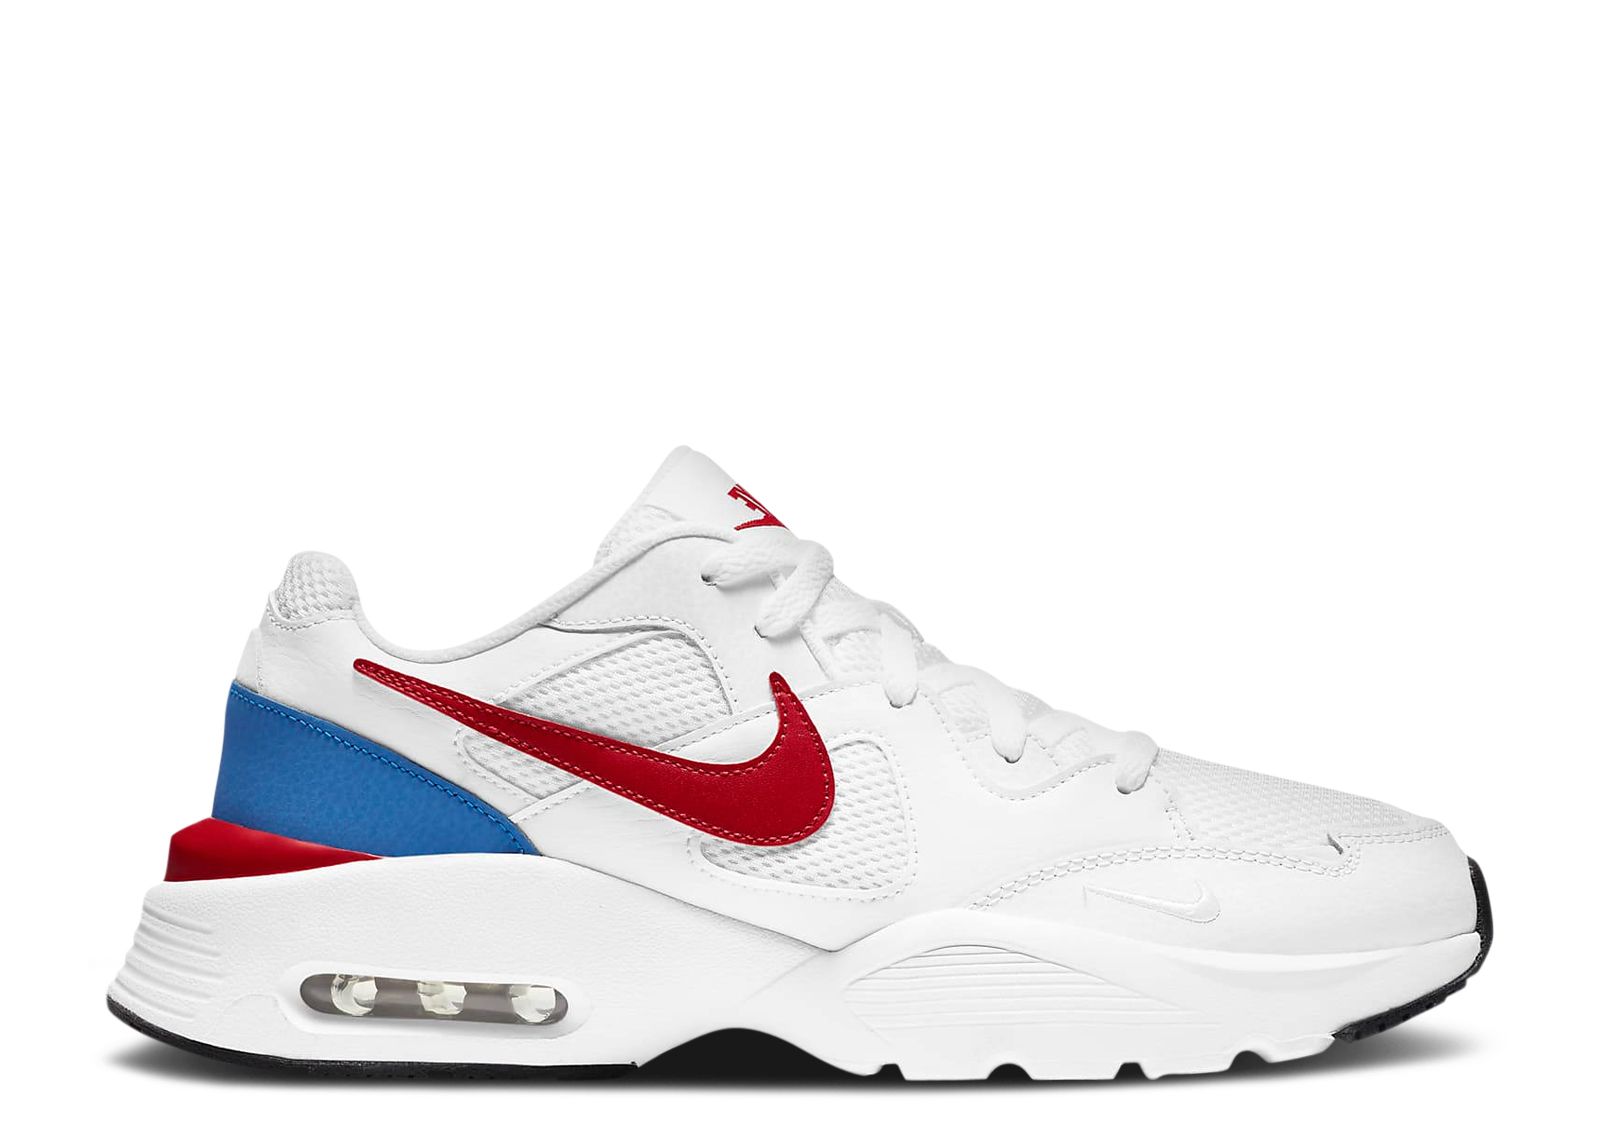 Кроссовки Nike Air Max Fusion 'White Blue Red', белый кроссовки recykers the original series white red blue